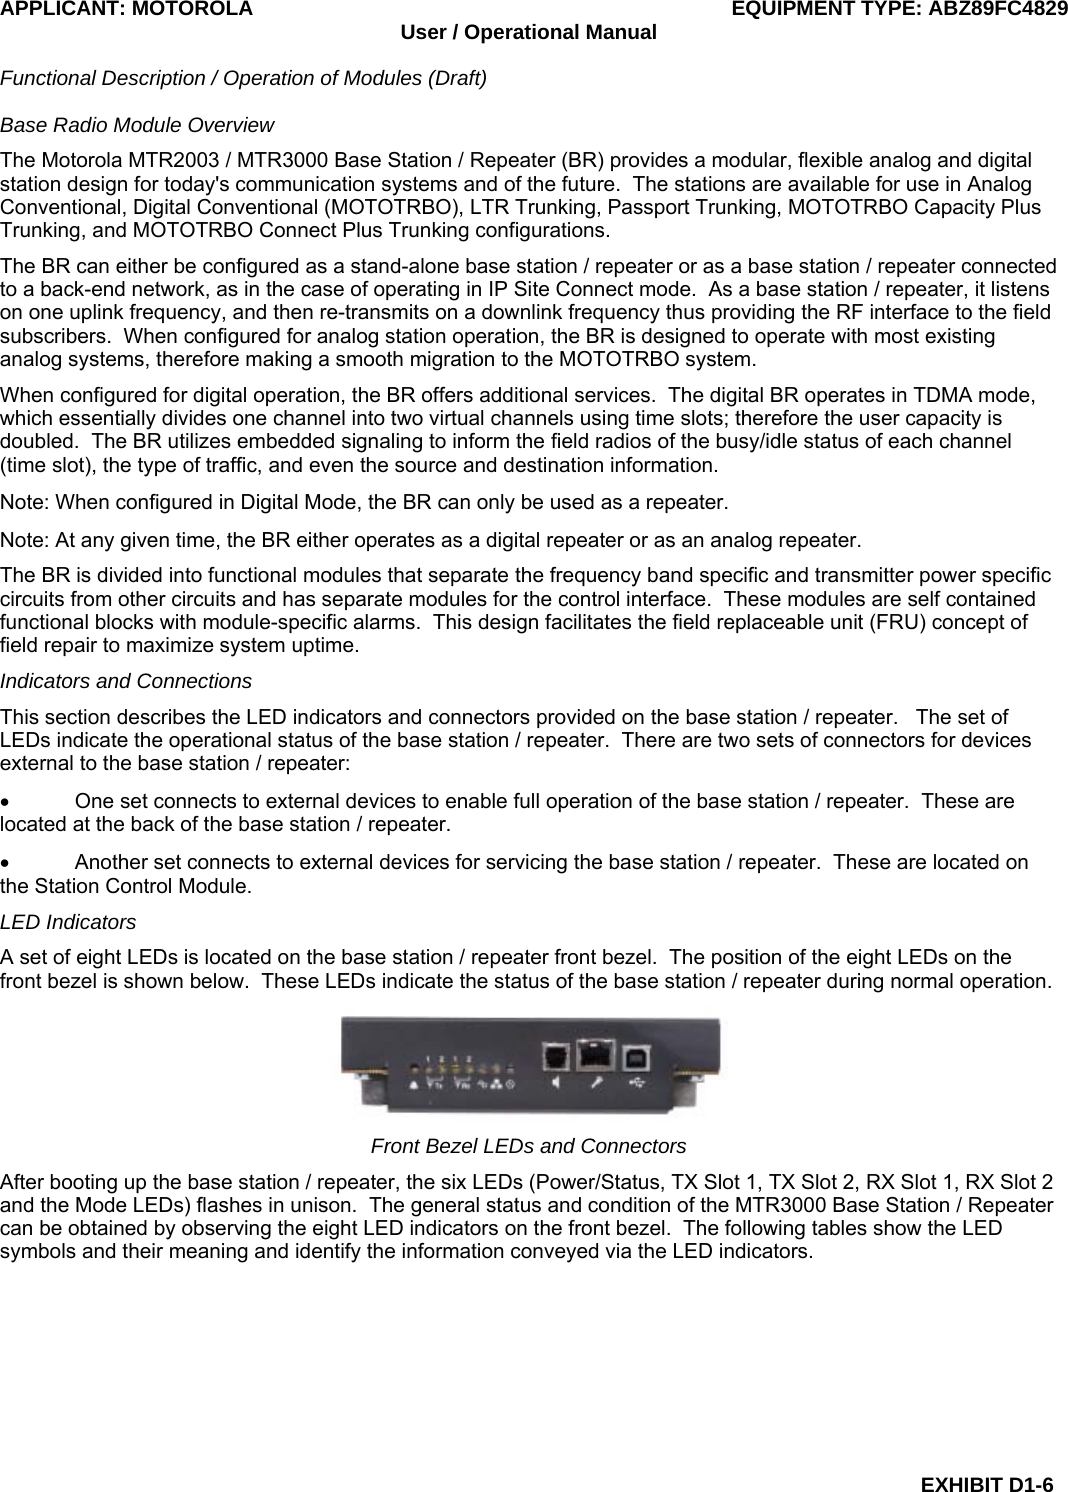 APPLICANT: MOTOROLA  EQUIPMENT TYPE: ABZ89FC4829 User / Operational Manual  Functional Description / Operation of Modules (Draft)  EXHIBIT D1-6 Base Radio Module Overview The Motorola MTR2003 / MTR3000 Base Station / Repeater (BR) provides a modular, flexible analog and digital station design for today&apos;s communication systems and of the future.  The stations are available for use in Analog Conventional, Digital Conventional (MOTOTRBO), LTR Trunking, Passport Trunking, MOTOTRBO Capacity Plus Trunking, and MOTOTRBO Connect Plus Trunking configurations. The BR can either be configured as a stand-alone base station / repeater or as a base station / repeater connected to a back-end network, as in the case of operating in IP Site Connect mode.  As a base station / repeater, it listens on one uplink frequency, and then re-transmits on a downlink frequency thus providing the RF interface to the field subscribers.  When configured for analog station operation, the BR is designed to operate with most existing analog systems, therefore making a smooth migration to the MOTOTRBO system. When configured for digital operation, the BR offers additional services.  The digital BR operates in TDMA mode, which essentially divides one channel into two virtual channels using time slots; therefore the user capacity is doubled.  The BR utilizes embedded signaling to inform the field radios of the busy/idle status of each channel (time slot), the type of traffic, and even the source and destination information. Note: When configured in Digital Mode, the BR can only be used as a repeater. Note: At any given time, the BR either operates as a digital repeater or as an analog repeater. The BR is divided into functional modules that separate the frequency band specific and transmitter power specific circuits from other circuits and has separate modules for the control interface.  These modules are self contained functional blocks with module-specific alarms.  This design facilitates the field replaceable unit (FRU) concept of field repair to maximize system uptime. Indicators and Connections This section describes the LED indicators and connectors provided on the base station / repeater.   The set of LEDs indicate the operational status of the base station / repeater.  There are two sets of connectors for devices external to the base station / repeater: •  One set connects to external devices to enable full operation of the base station / repeater.  These are located at the back of the base station / repeater. •  Another set connects to external devices for servicing the base station / repeater.  These are located on the Station Control Module. LED Indicators A set of eight LEDs is located on the base station / repeater front bezel.  The position of the eight LEDs on the front bezel is shown below.  These LEDs indicate the status of the base station / repeater during normal operation.  Front Bezel LEDs and Connectors After booting up the base station / repeater, the six LEDs (Power/Status, TX Slot 1, TX Slot 2, RX Slot 1, RX Slot 2 and the Mode LEDs) flashes in unison.  The general status and condition of the MTR3000 Base Station / Repeater can be obtained by observing the eight LED indicators on the front bezel.  The following tables show the LED symbols and their meaning and identify the information conveyed via the LED indicators. 